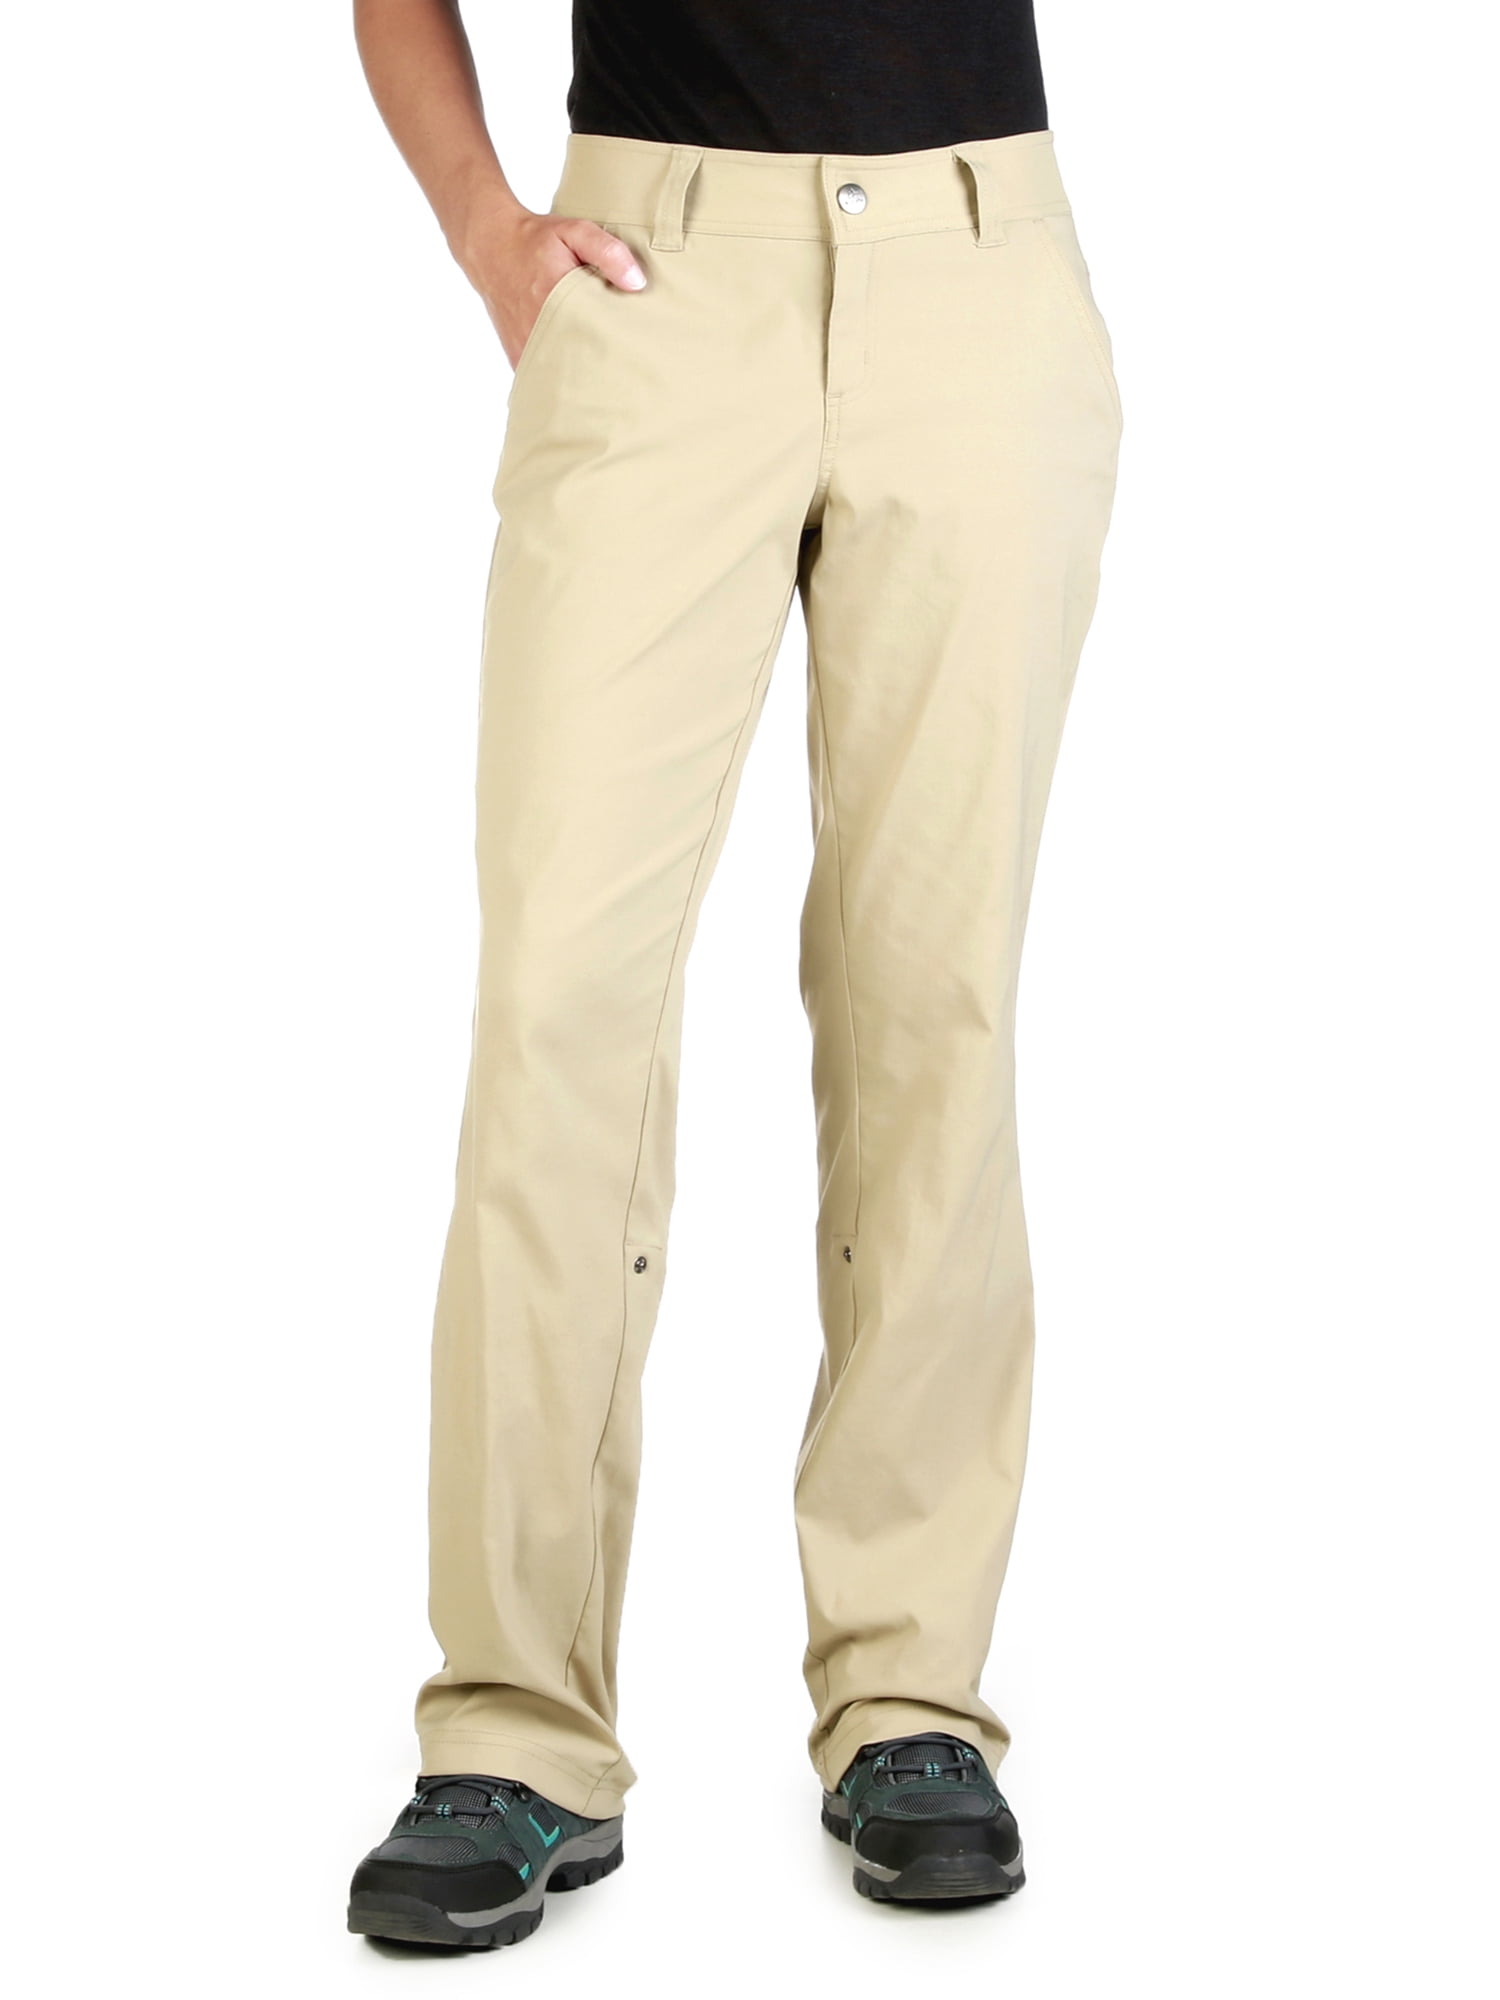 ladies walking hiking camping utility roll leg holiday trousers sand beige NEW 